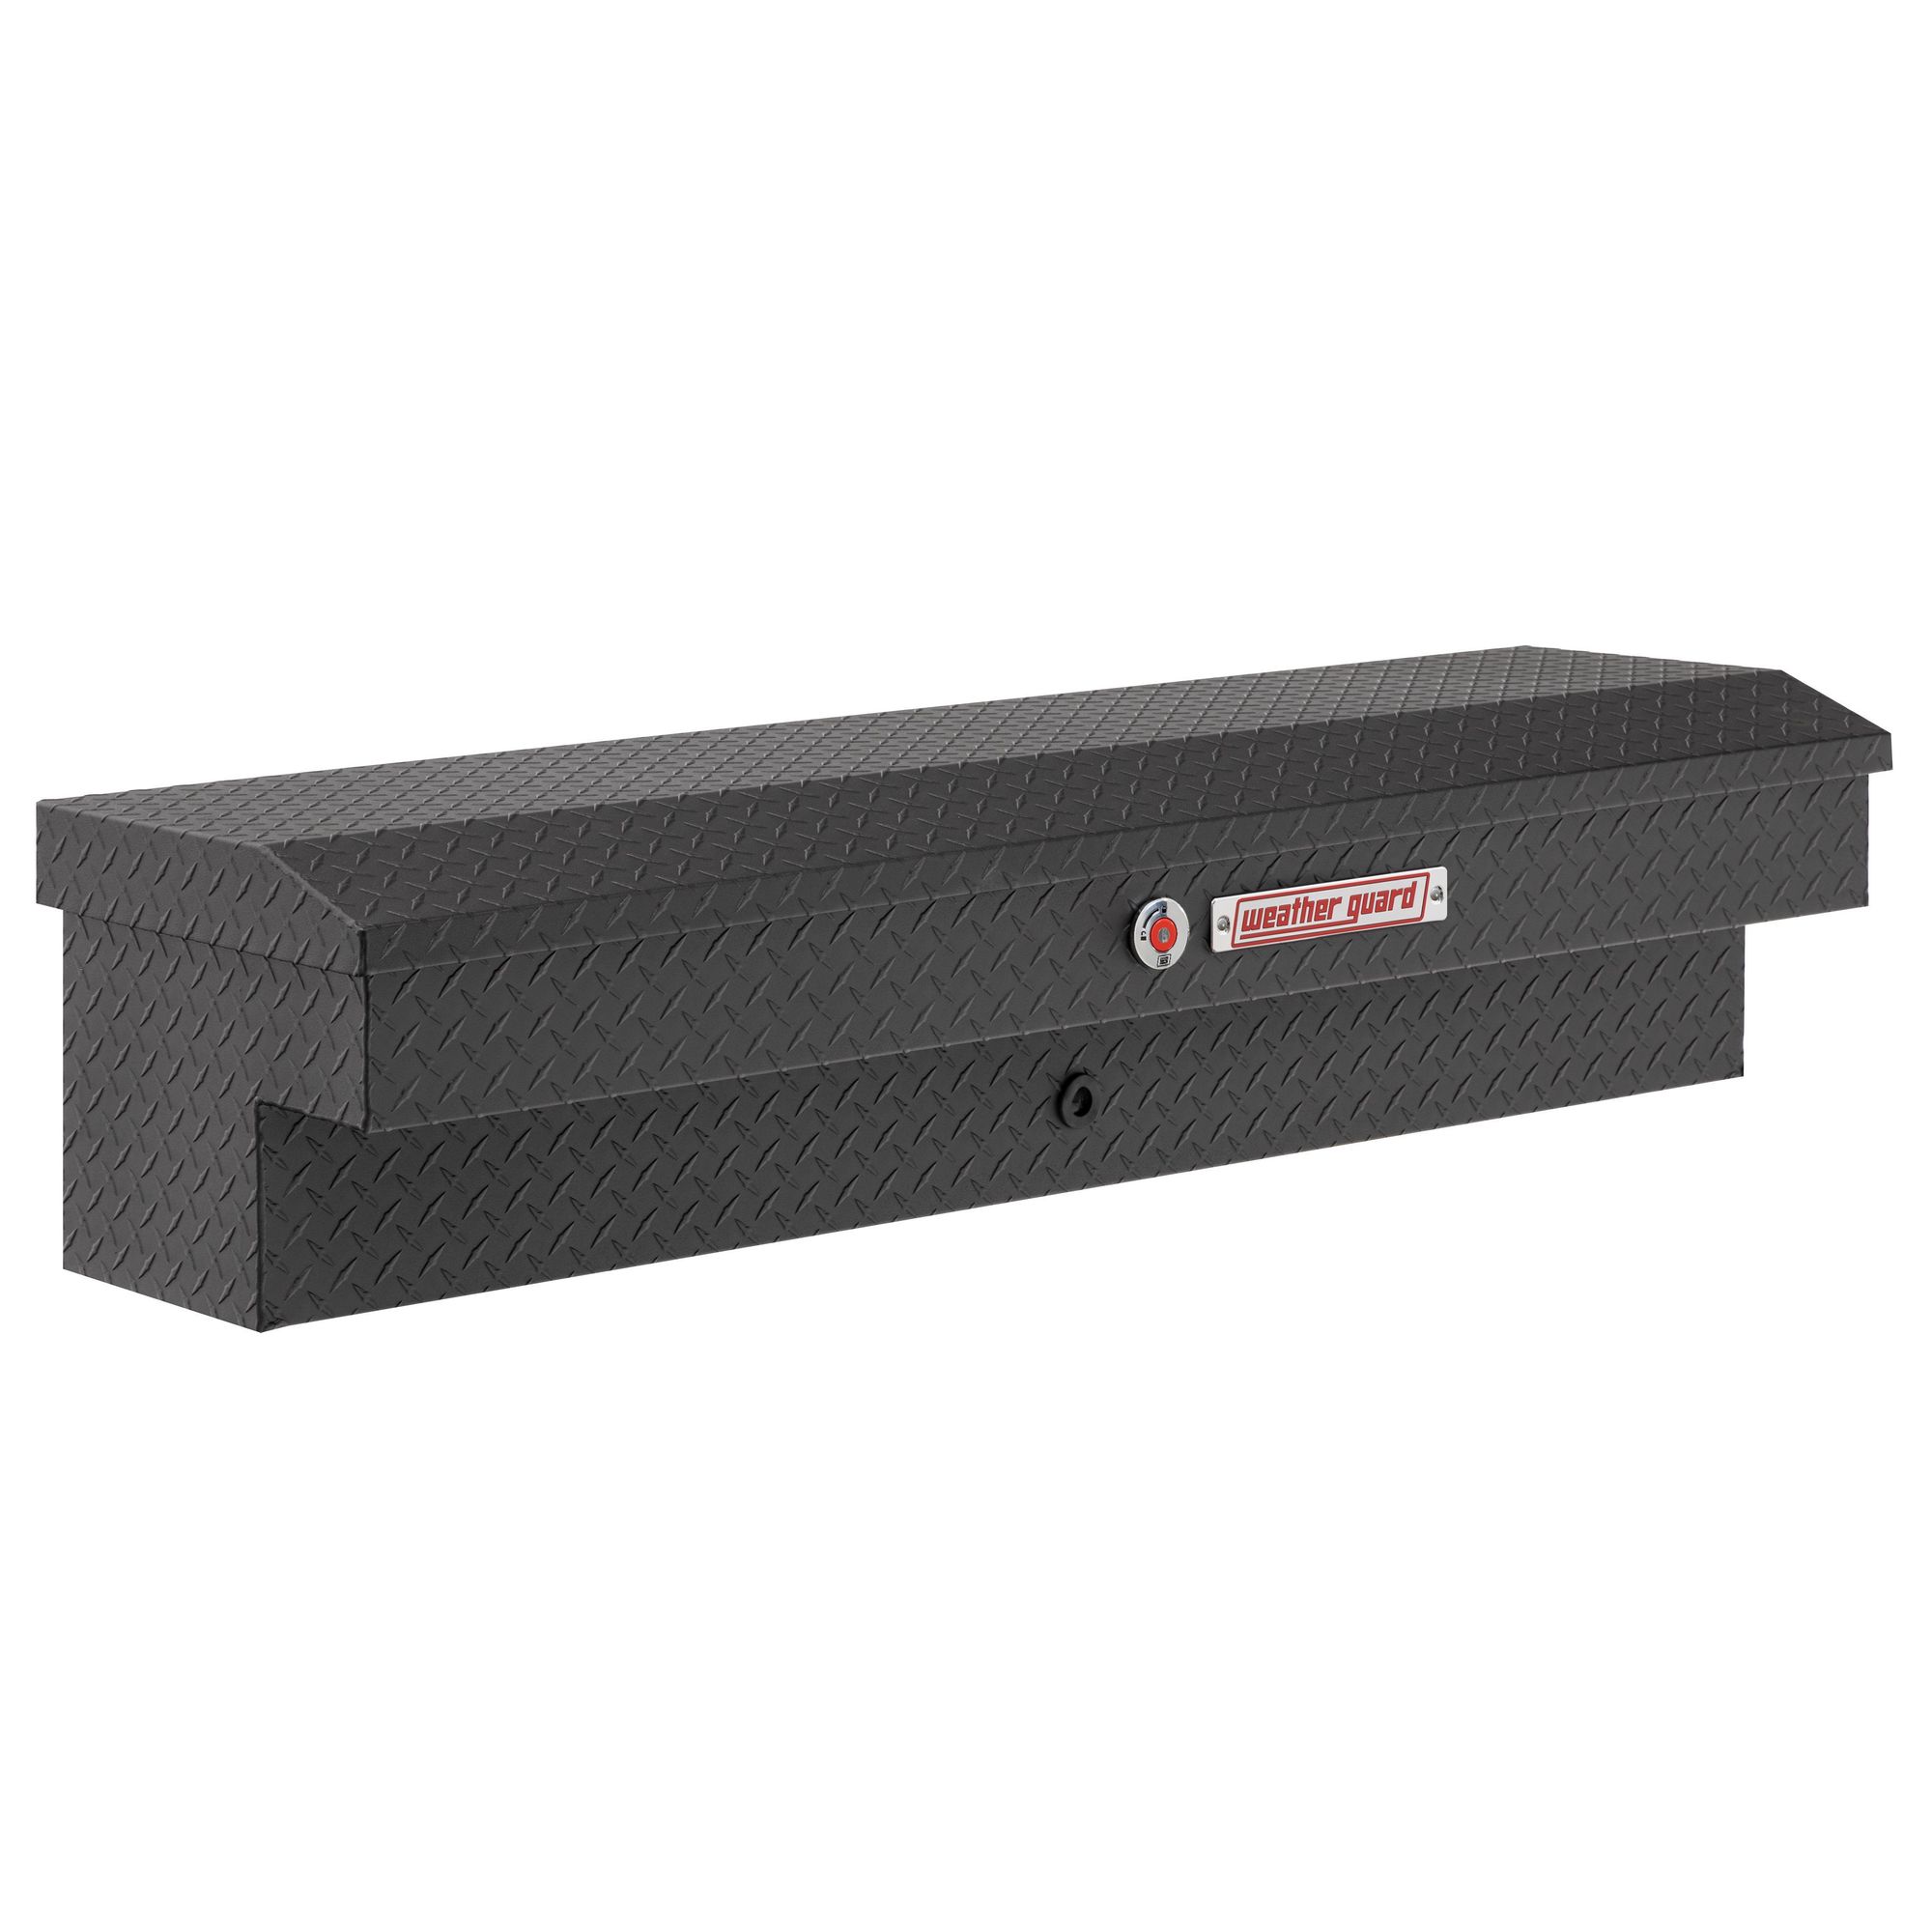 Weather Guard, 56Inch L Lo-Side Box, Width 56 in, Material Aluminum, Color Finish Textured Matte Black, Model 174-52-04